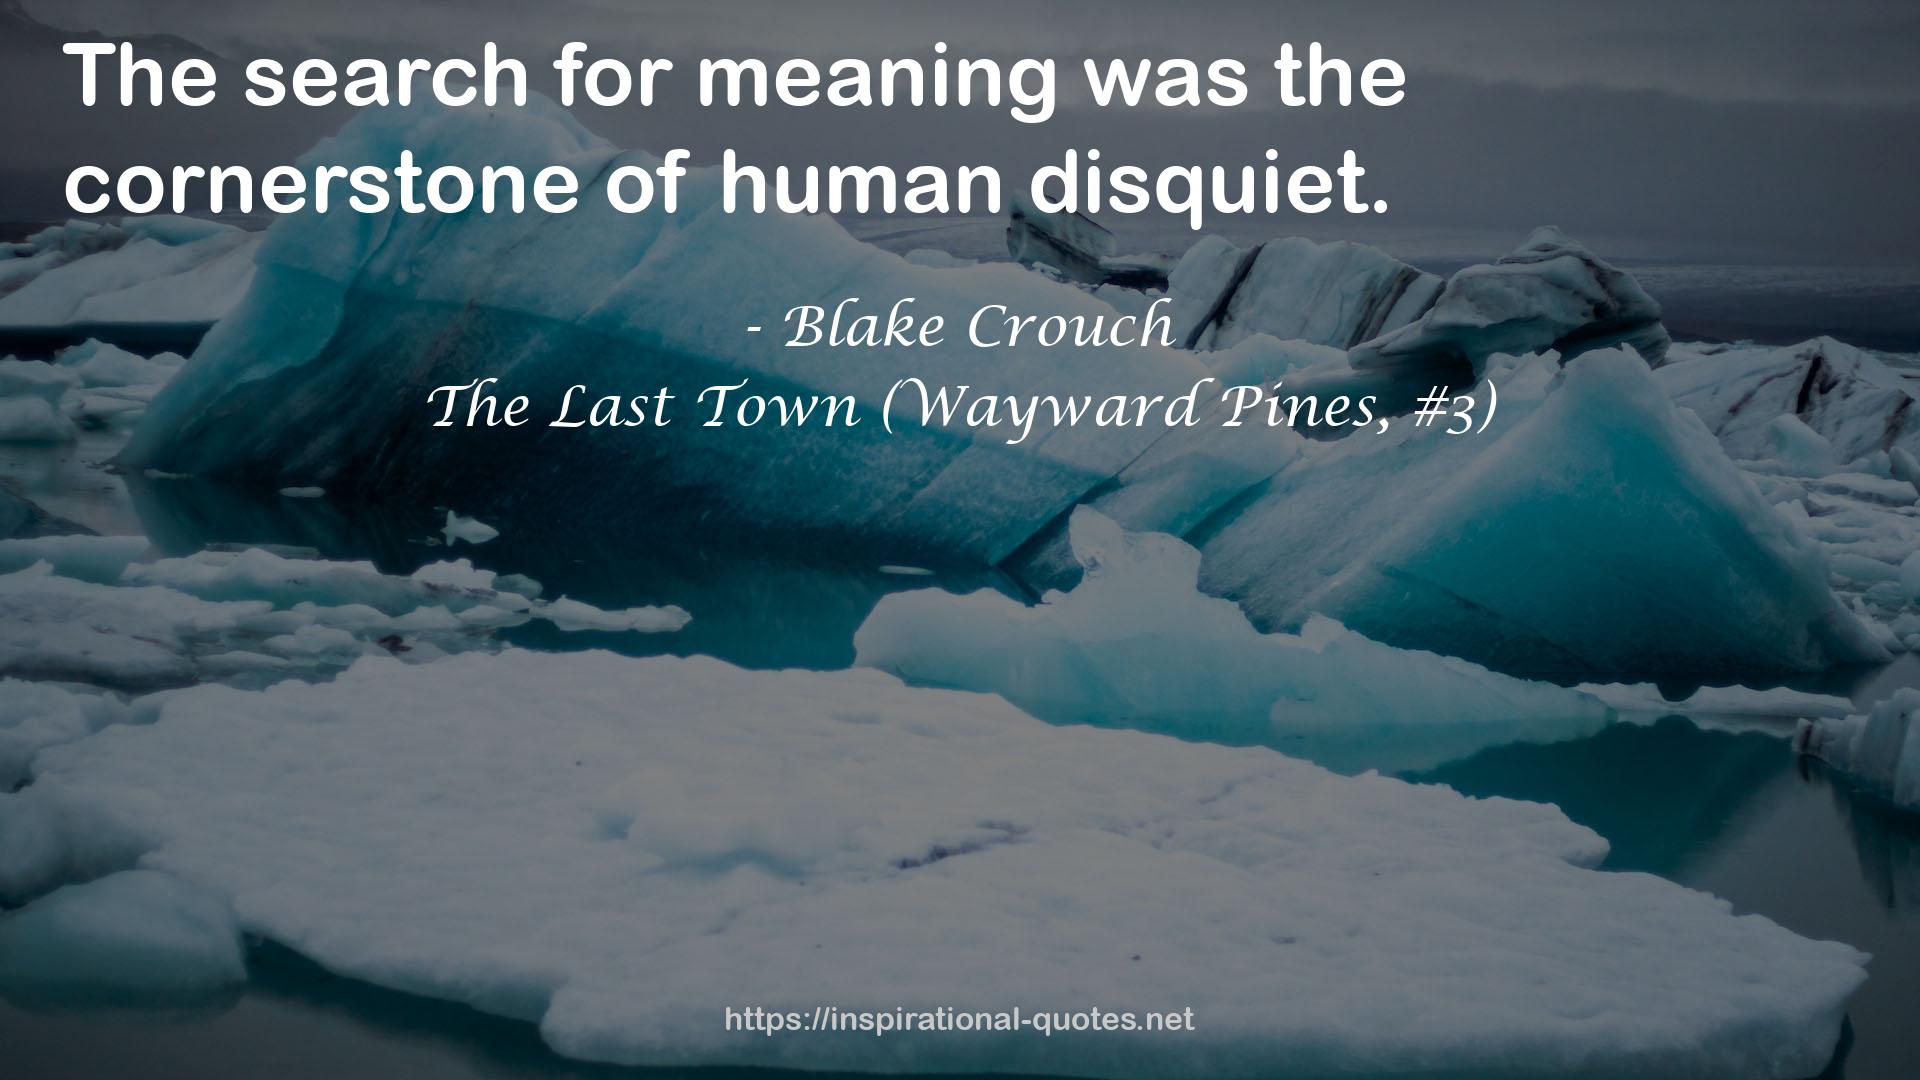 The Last Town (Wayward Pines, #3) QUOTES